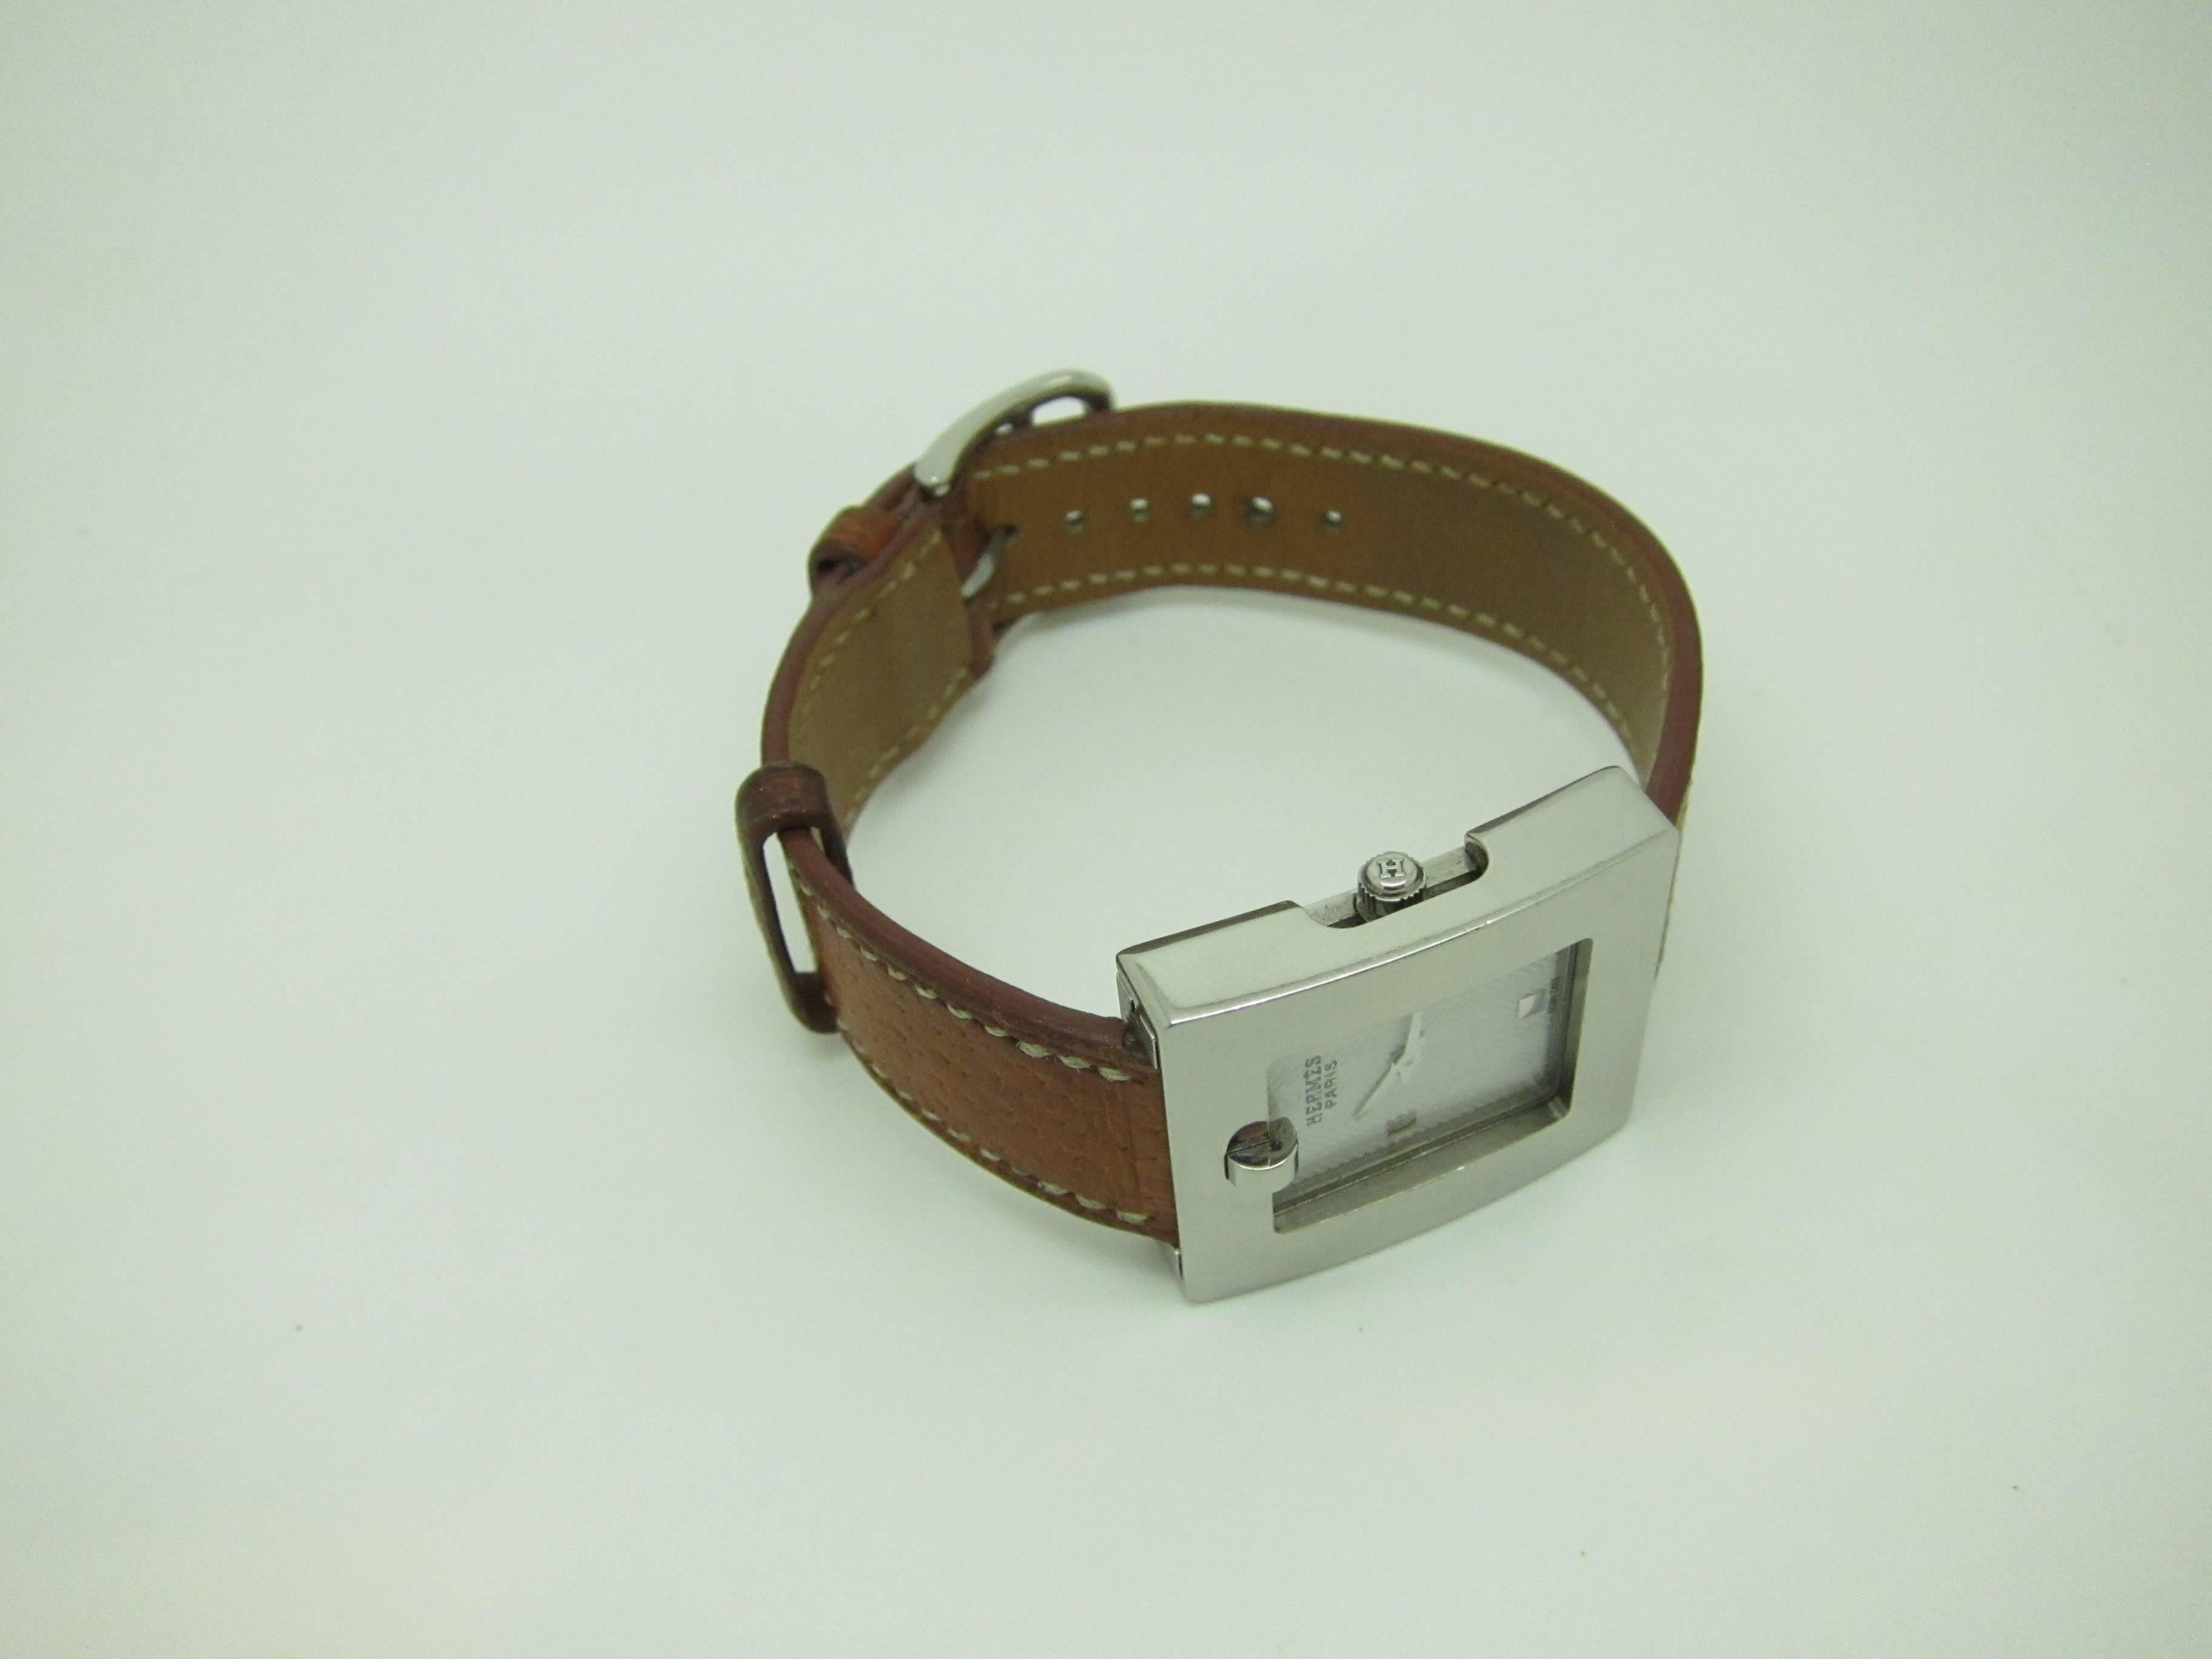 Nice Hermes Belt Watch in steel and leather hermes watch.

Good condition but some scratches in the case ( really light) Band with some patina but no cracking or defect.

